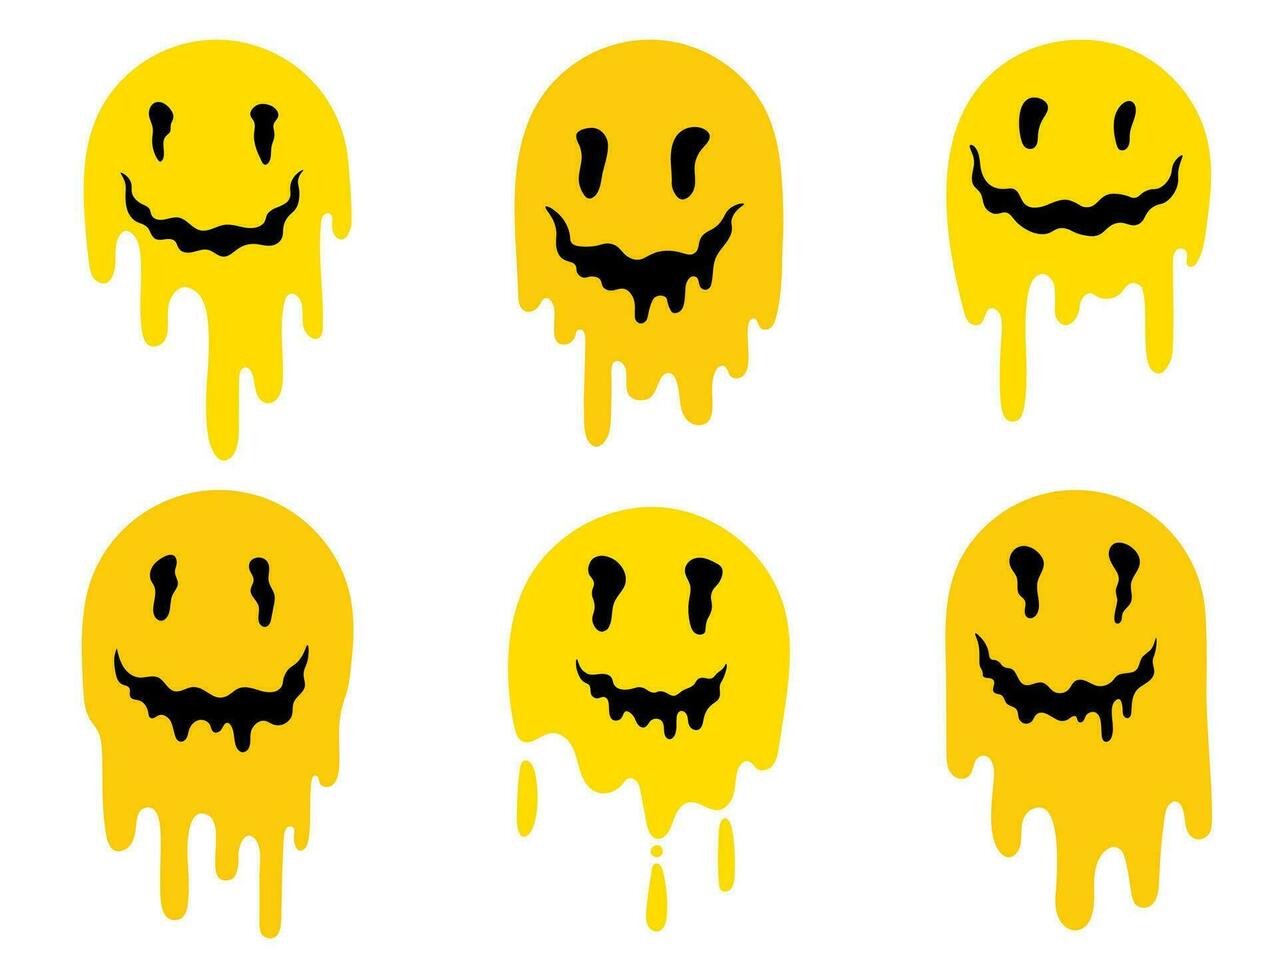 Melting or dripping smiles in flat stile. Set of psychedelic  Melted smile faces in trippy acid rave style isolated on white background. Set of hand drawn icons. vector